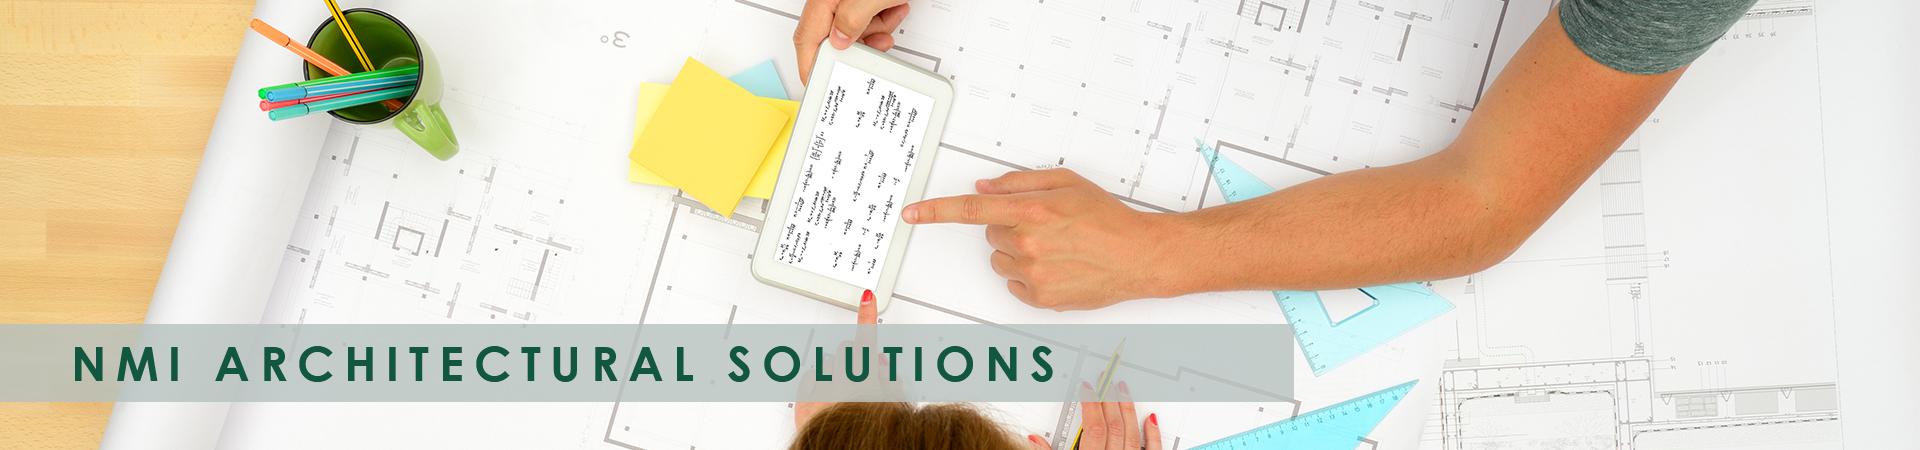 NMI architectural solutions consulting services